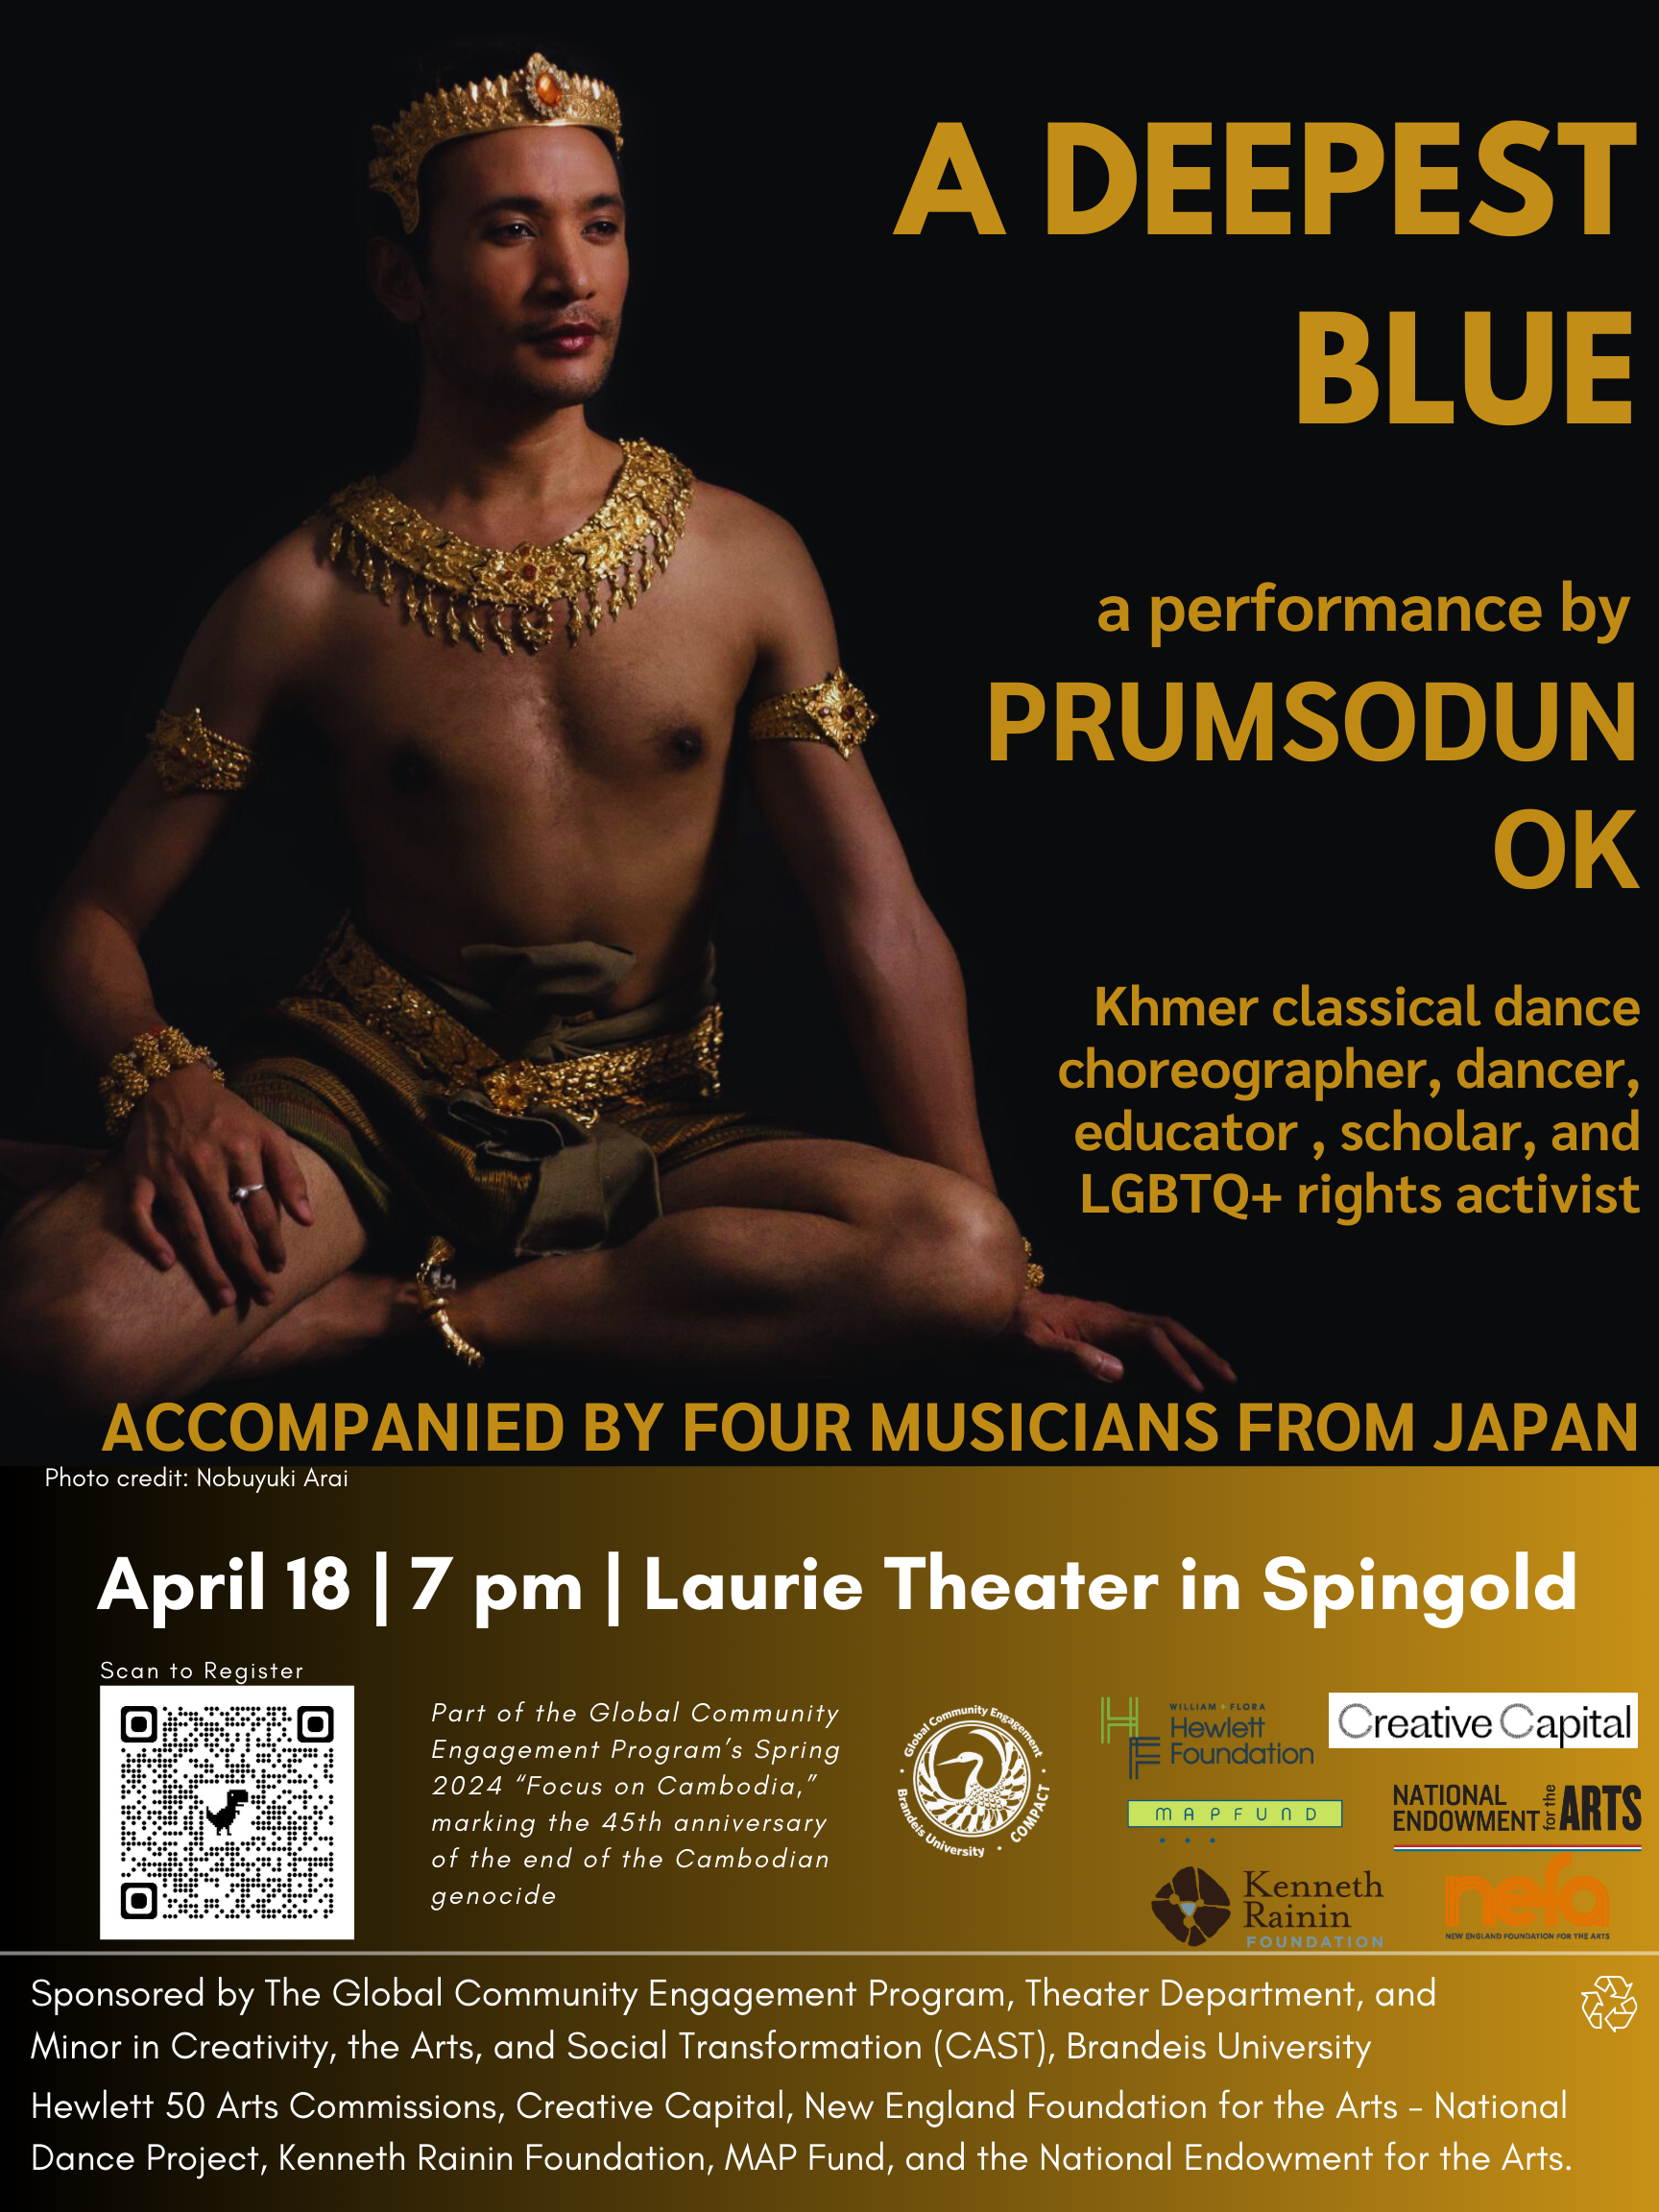 A Deepest Blue poster with event information over photo of performer.